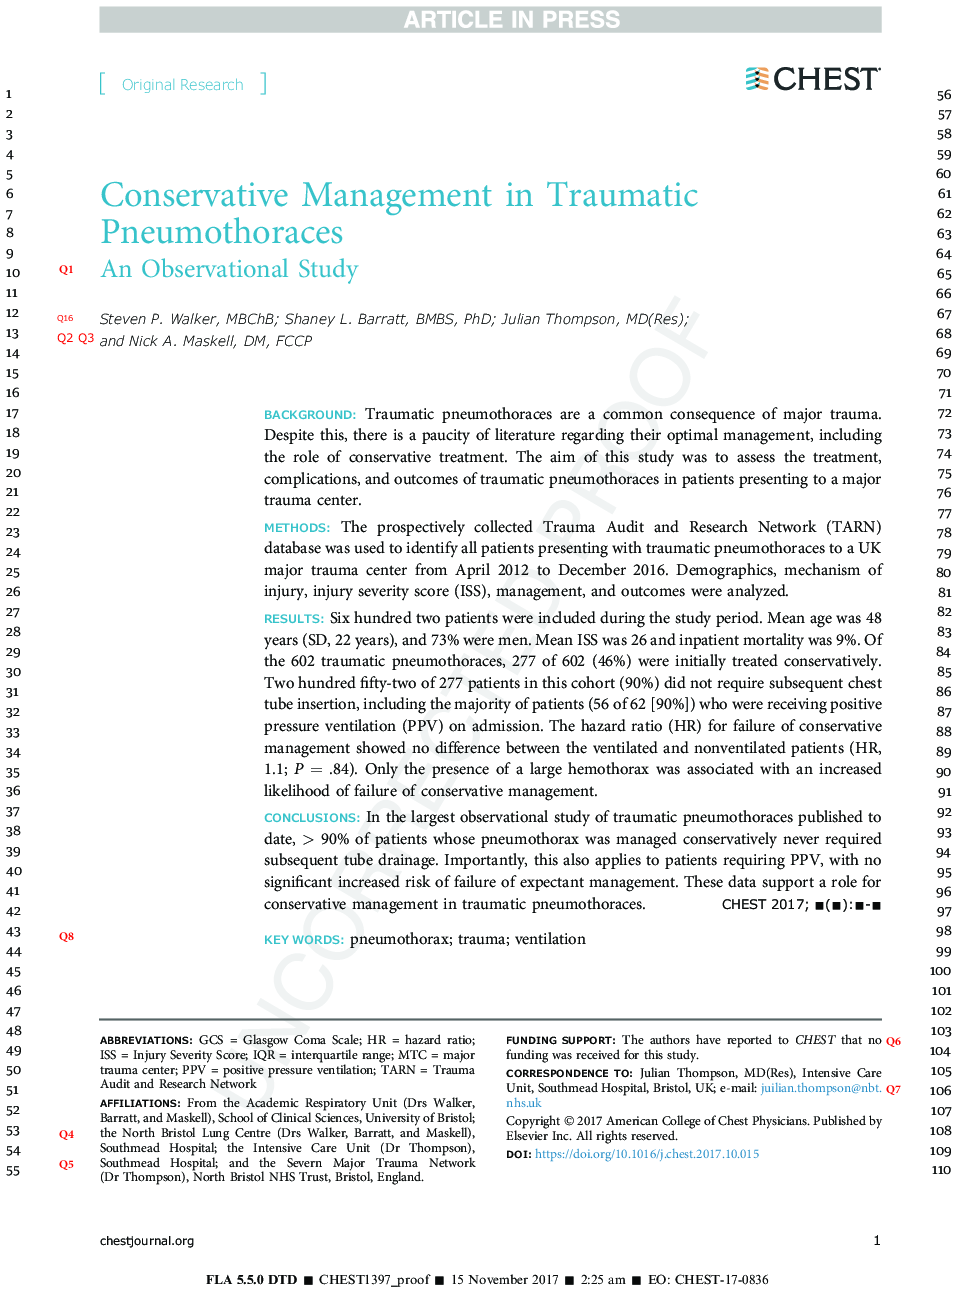 Conservative Management in Traumatic Pneumothoraces